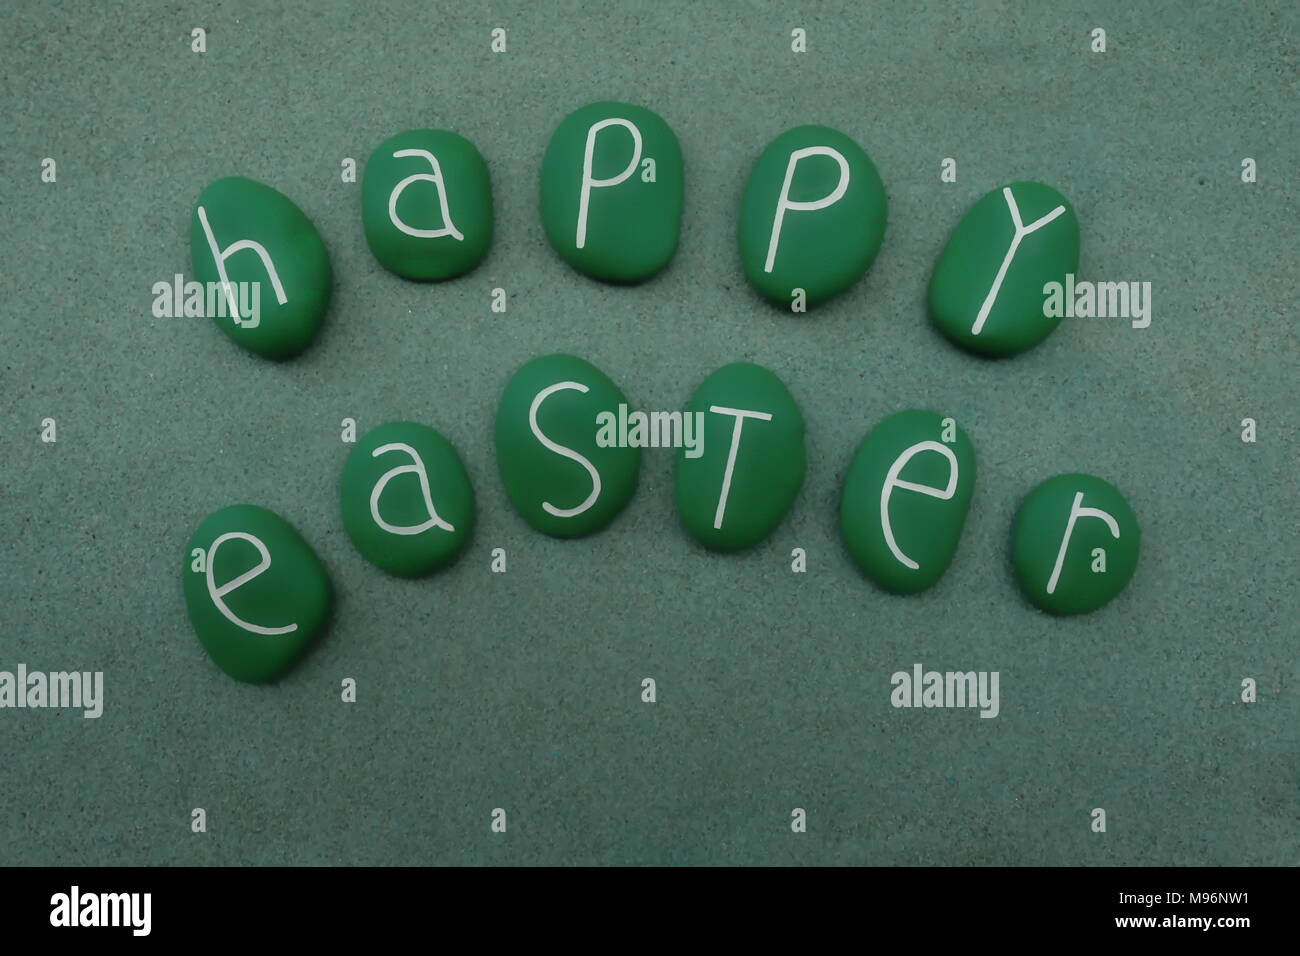 Happy Easter with green colored stones Stock Photo